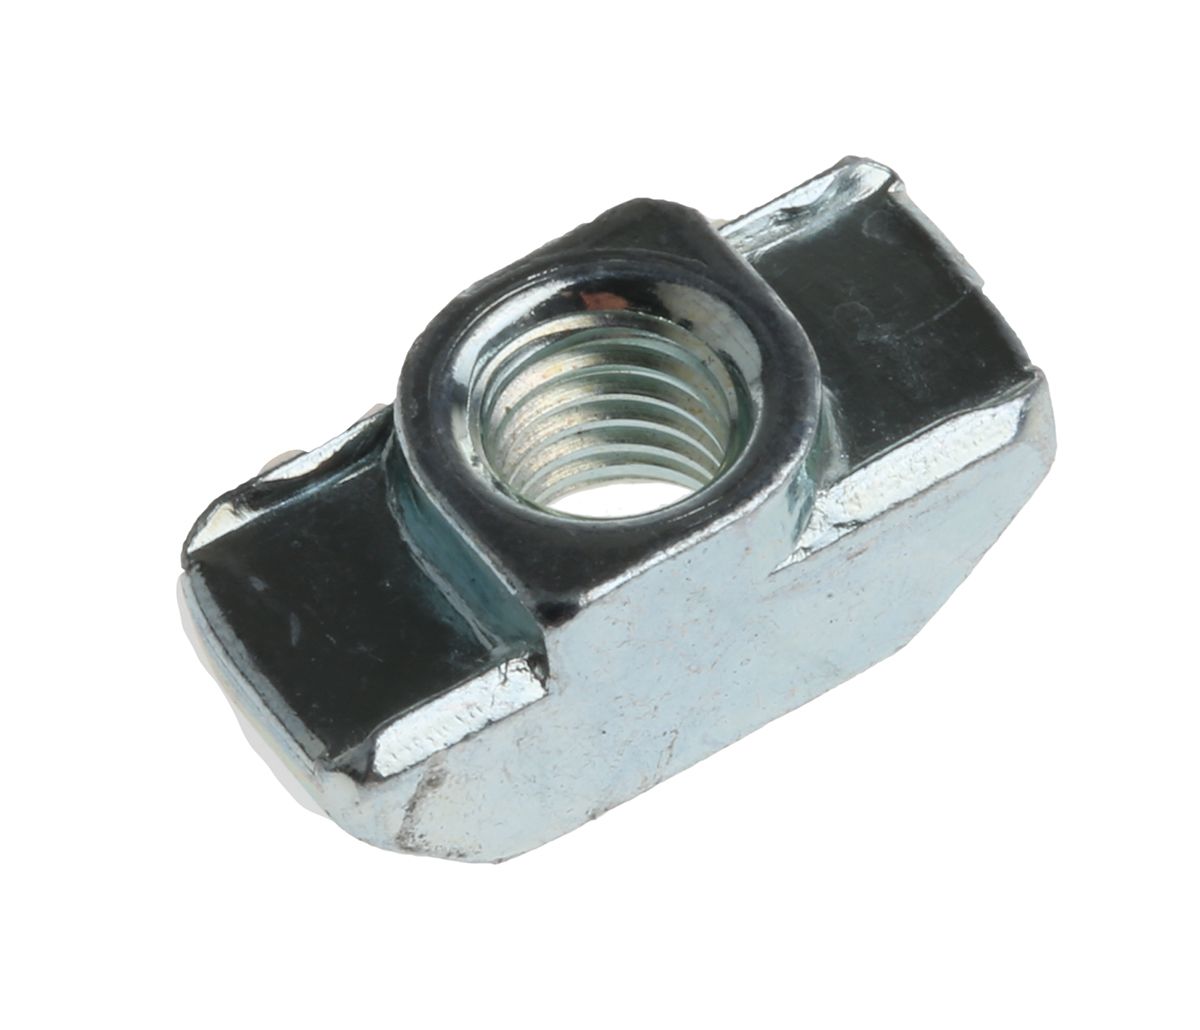 Bosch Rexroth Connecting Component, T-Slot Nut, strut profile 40 mm, 45 mm, 50 mm, 60 mm, groove Size 10mm